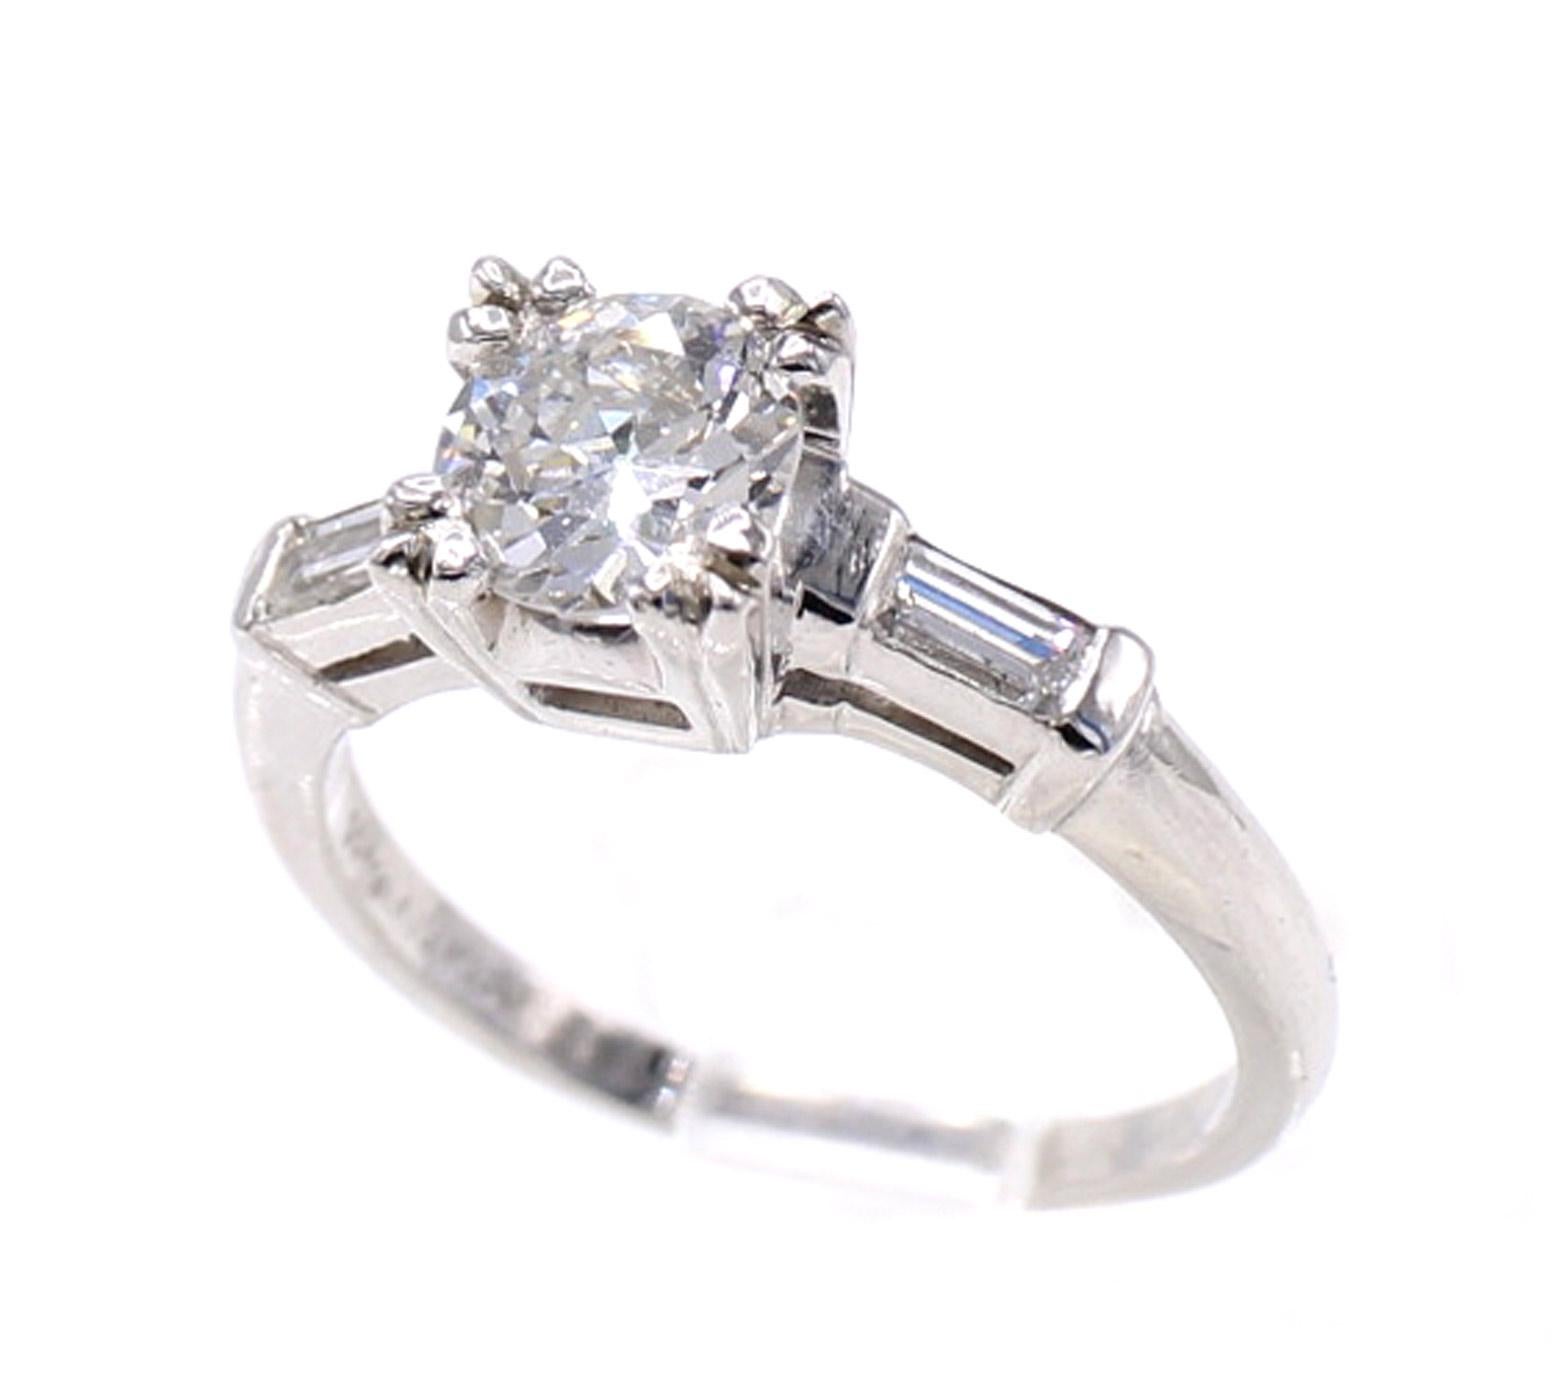 Gorgeous 0.91 carat Old European cut diamond set in a handmade fishtail prong polished platinum mounting with bright white baguette diamonds on each side. The beautiful cut, wider facets, and higher crown of this old cut stone bring an amazing fire,